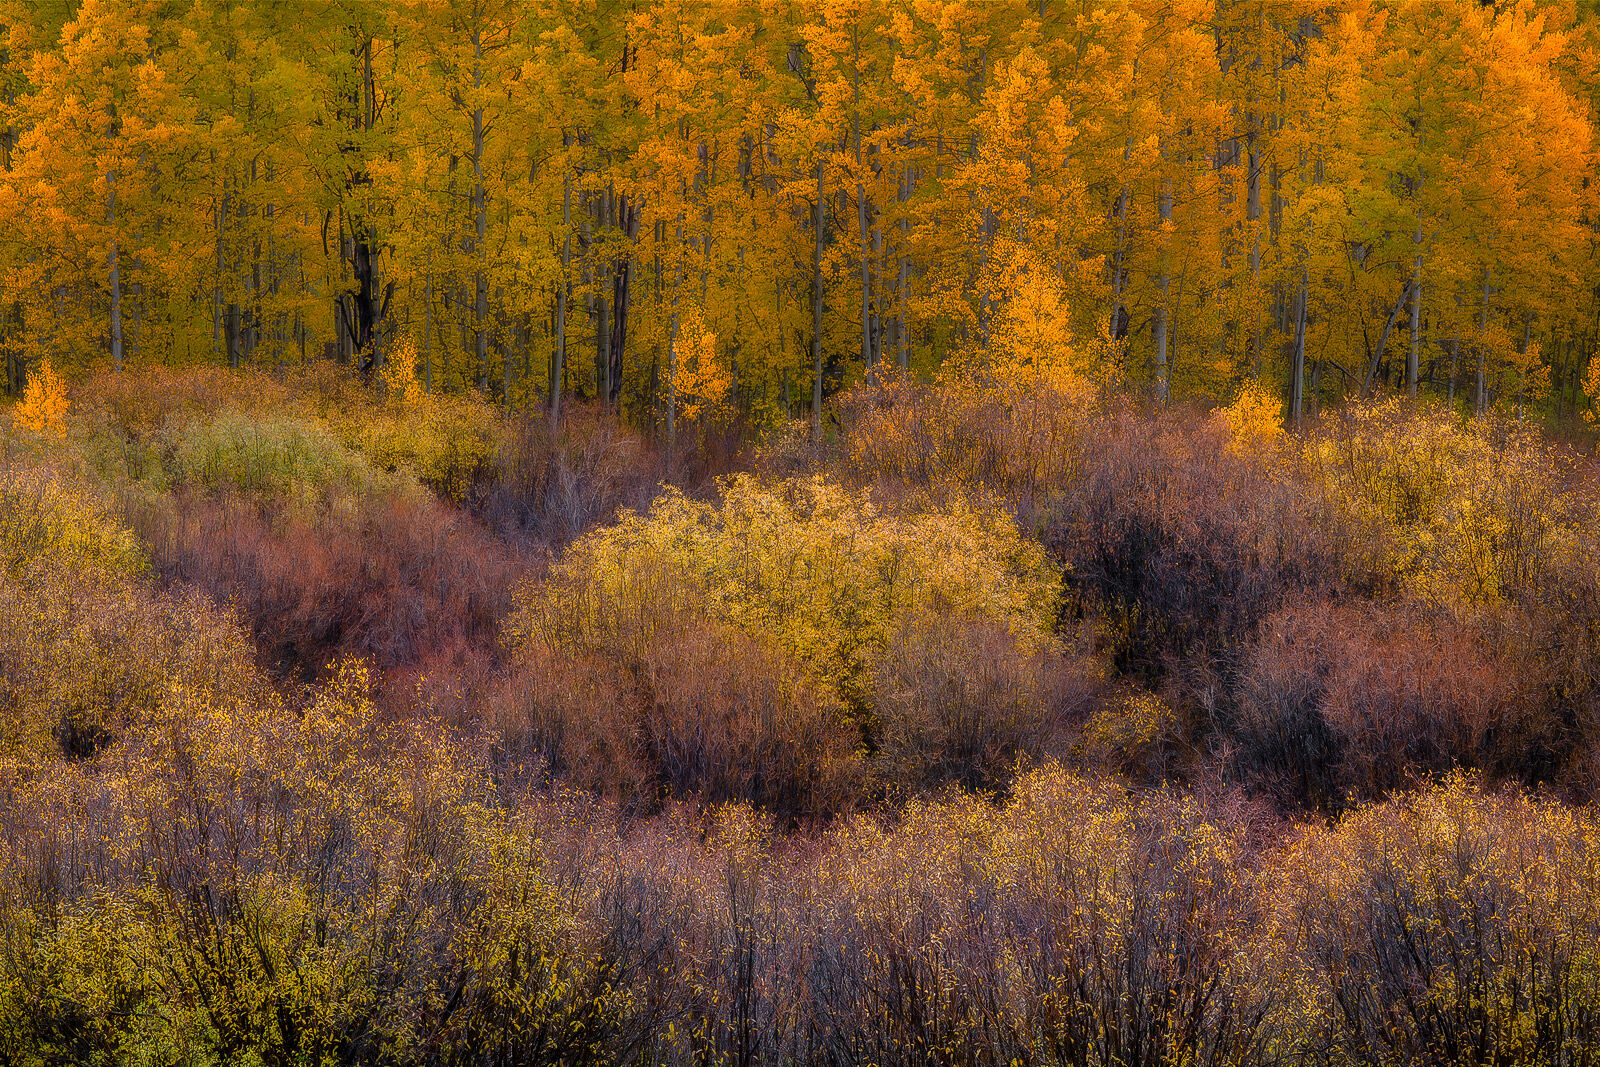 A marshy area with an aspen grove after rain shows deep reds in the brush and vibrant yellow aspen trees in the background.